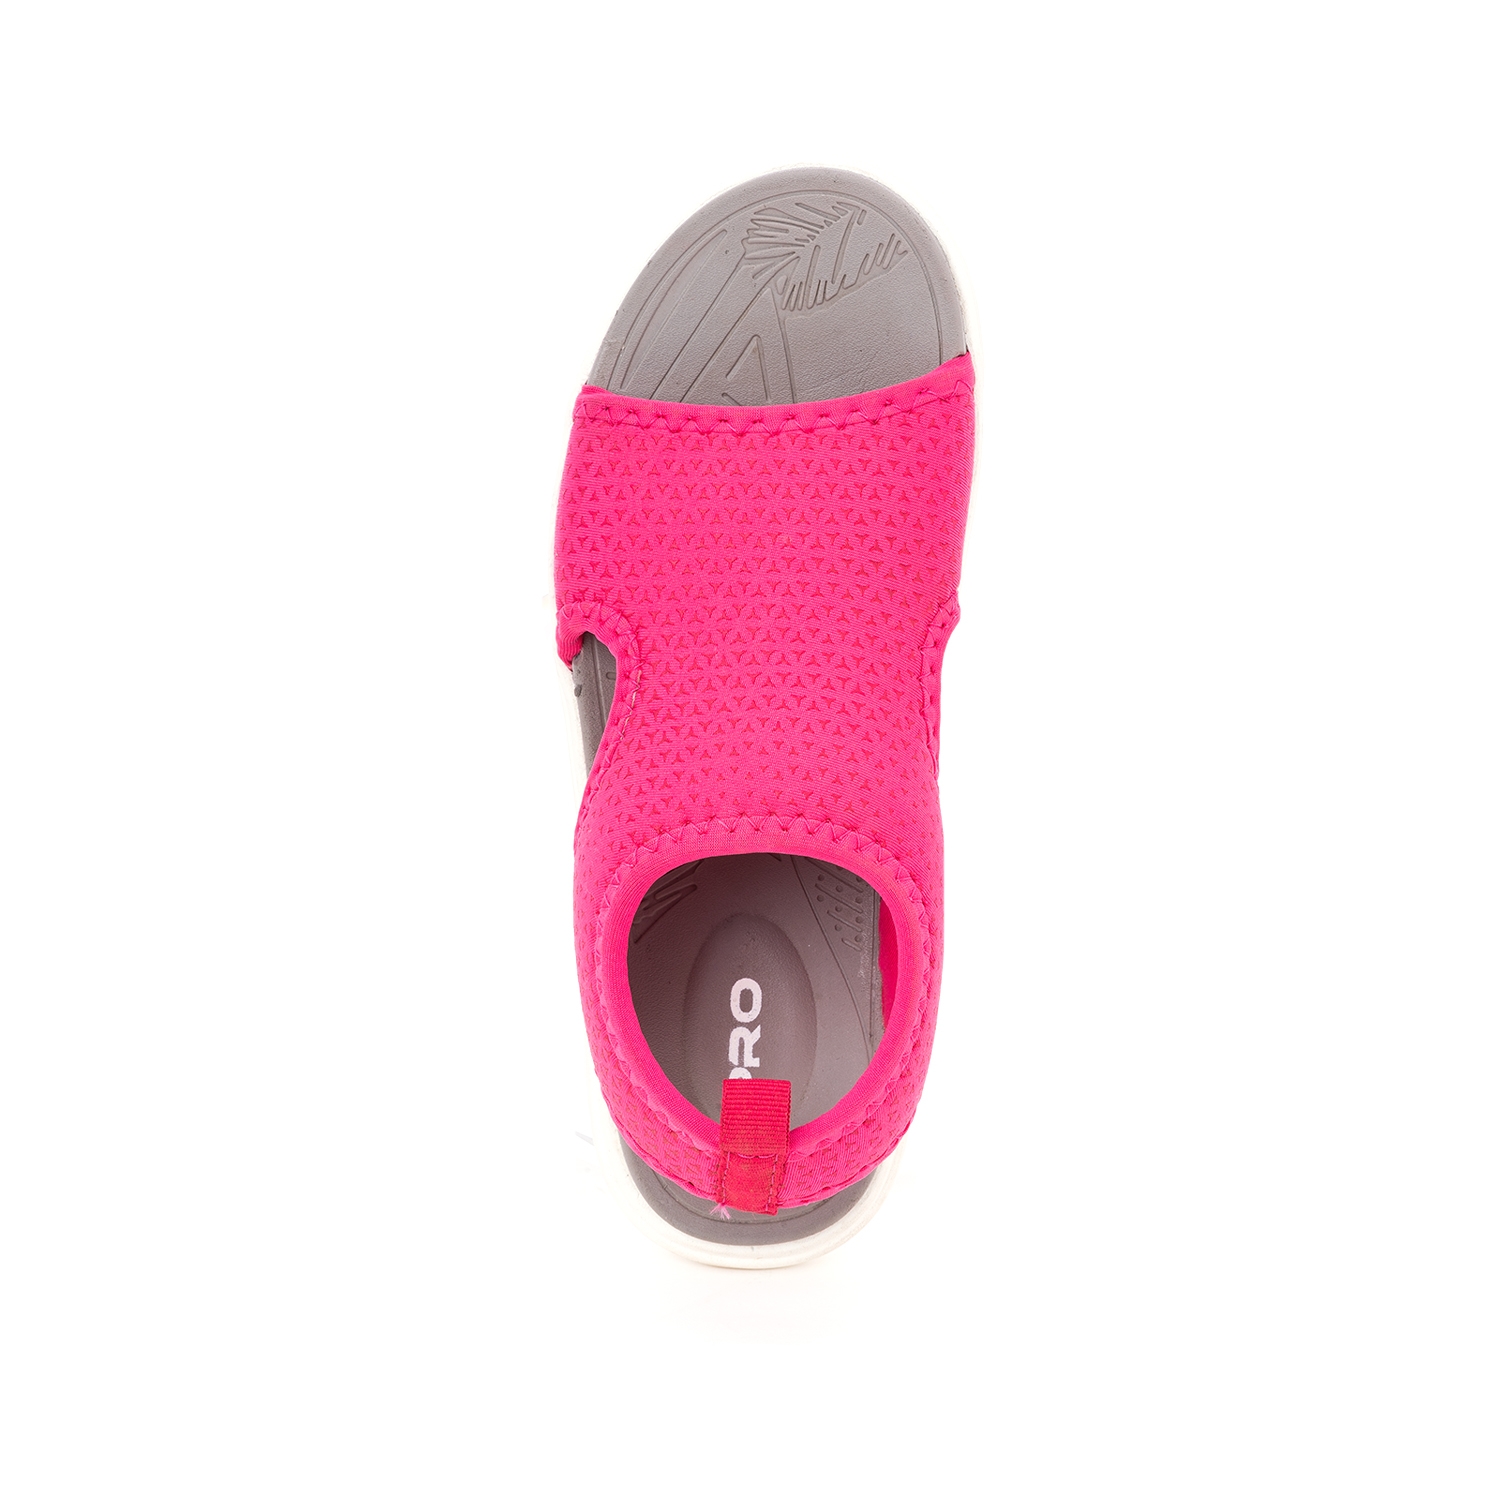 Khadim's Pink Colour Floaters / Sandals having Textile Upper Material - Daily Wear Use for Women ( Size : 3 )